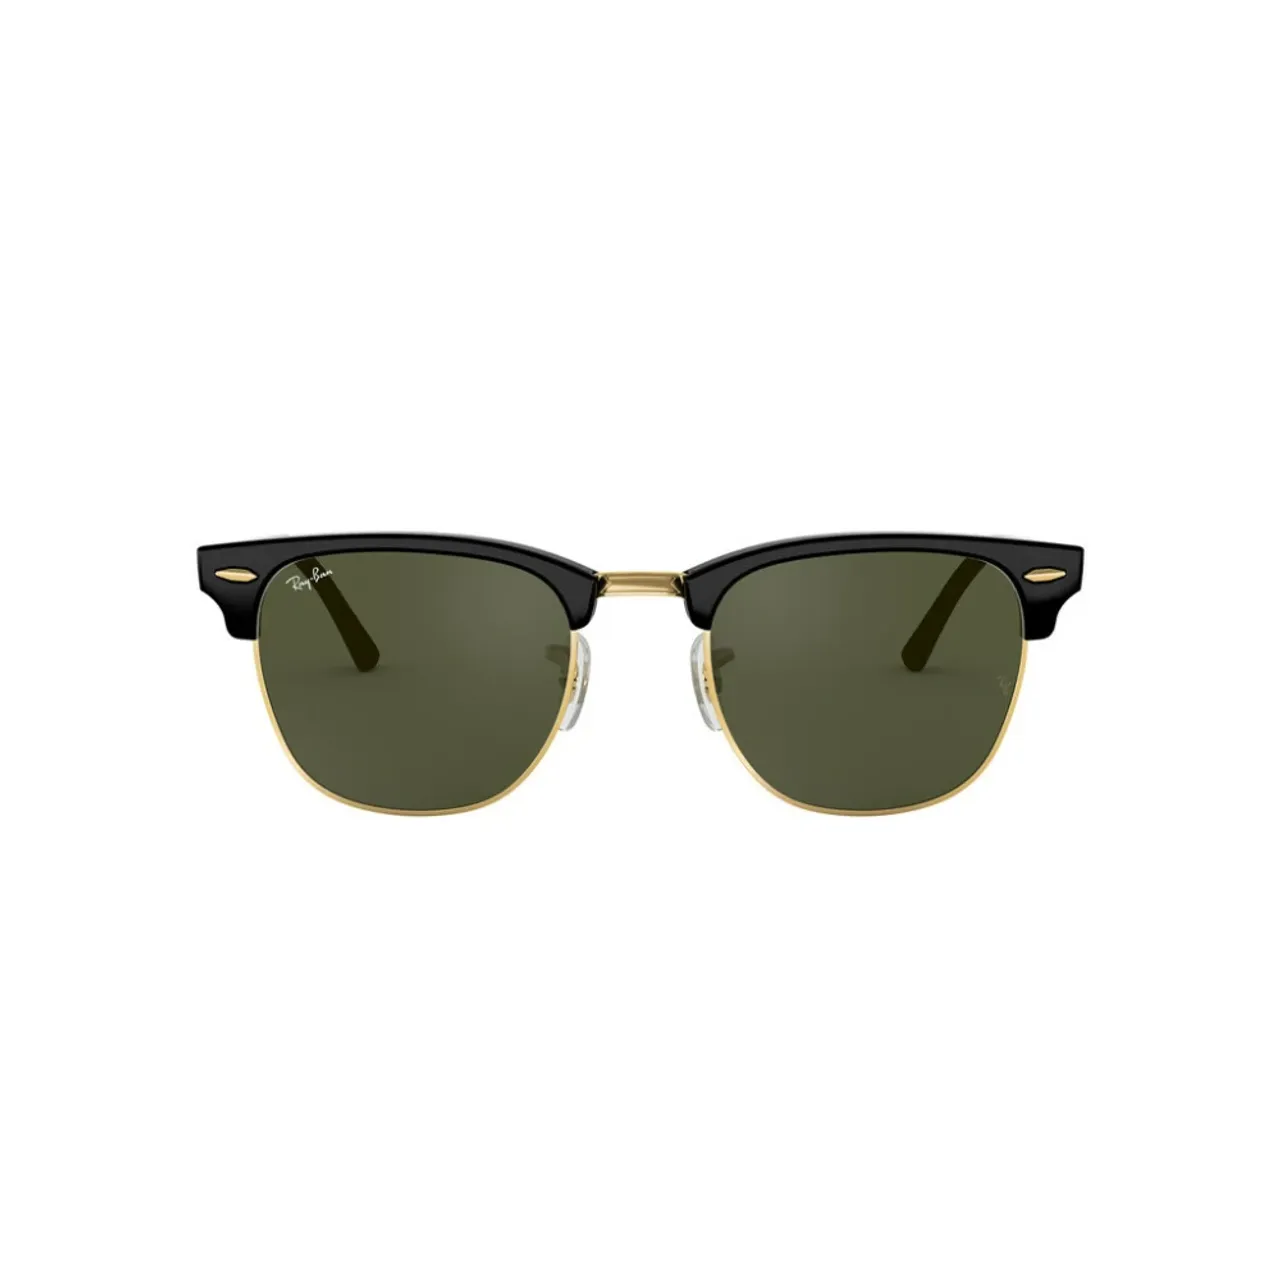 Ray-Ban , RB Clubmaster 3016 Sunglasses ,Black unisex, Sizes: